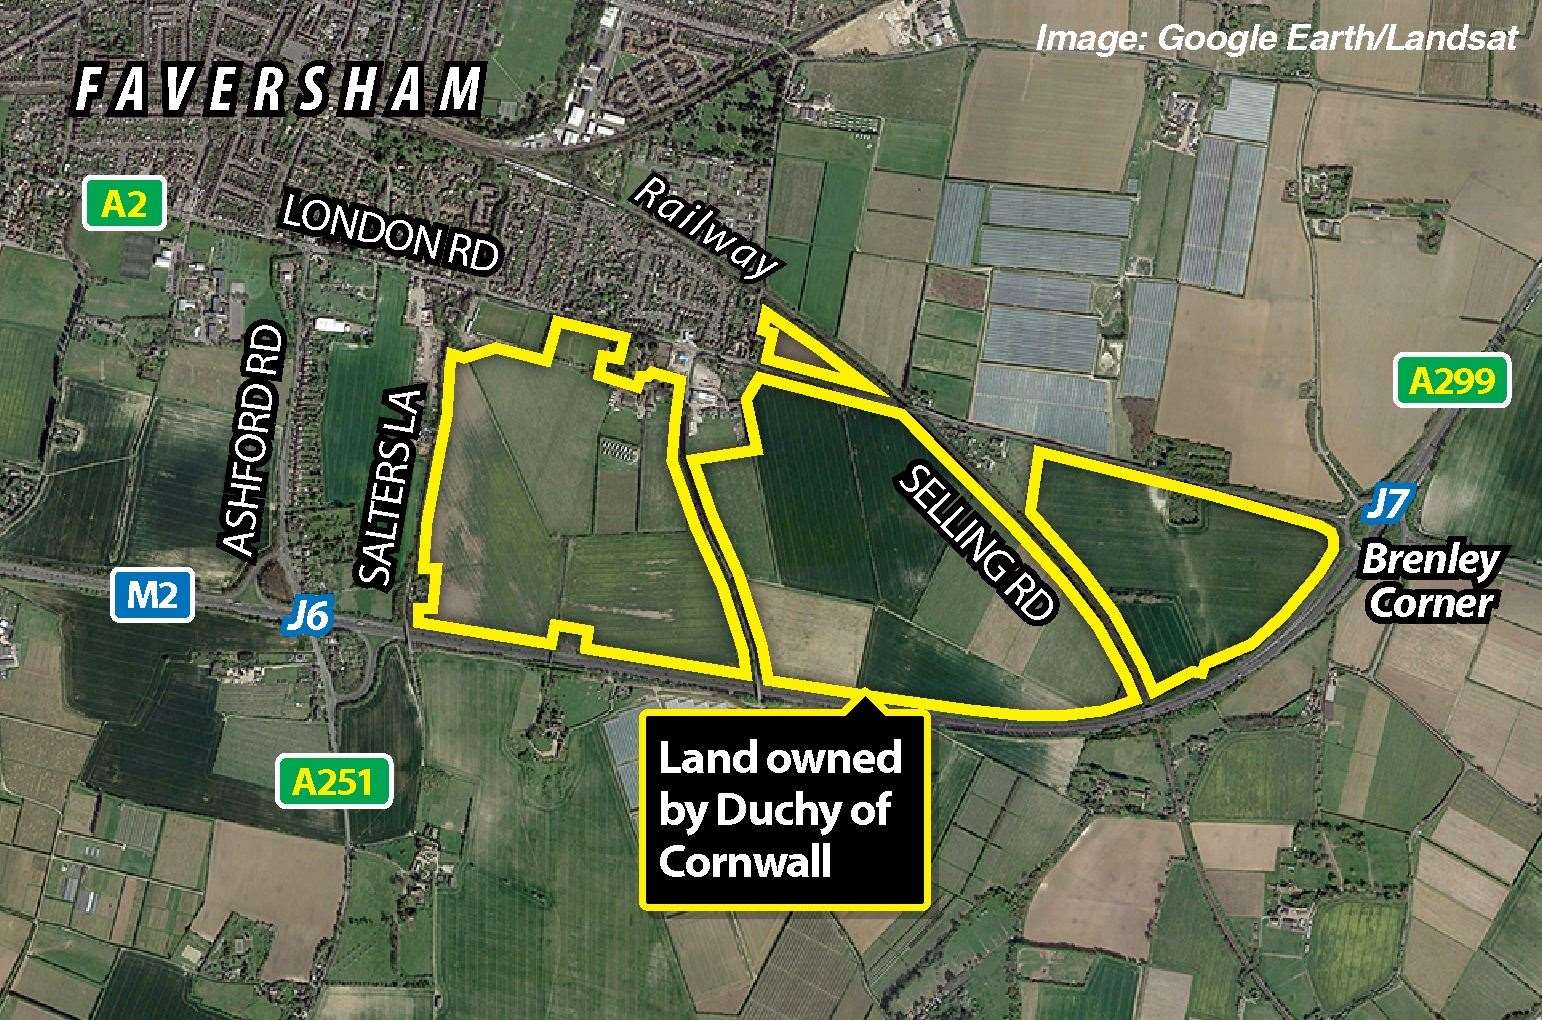 Homes are planned for this area of Faversham owned by the Duchy of Cornwall